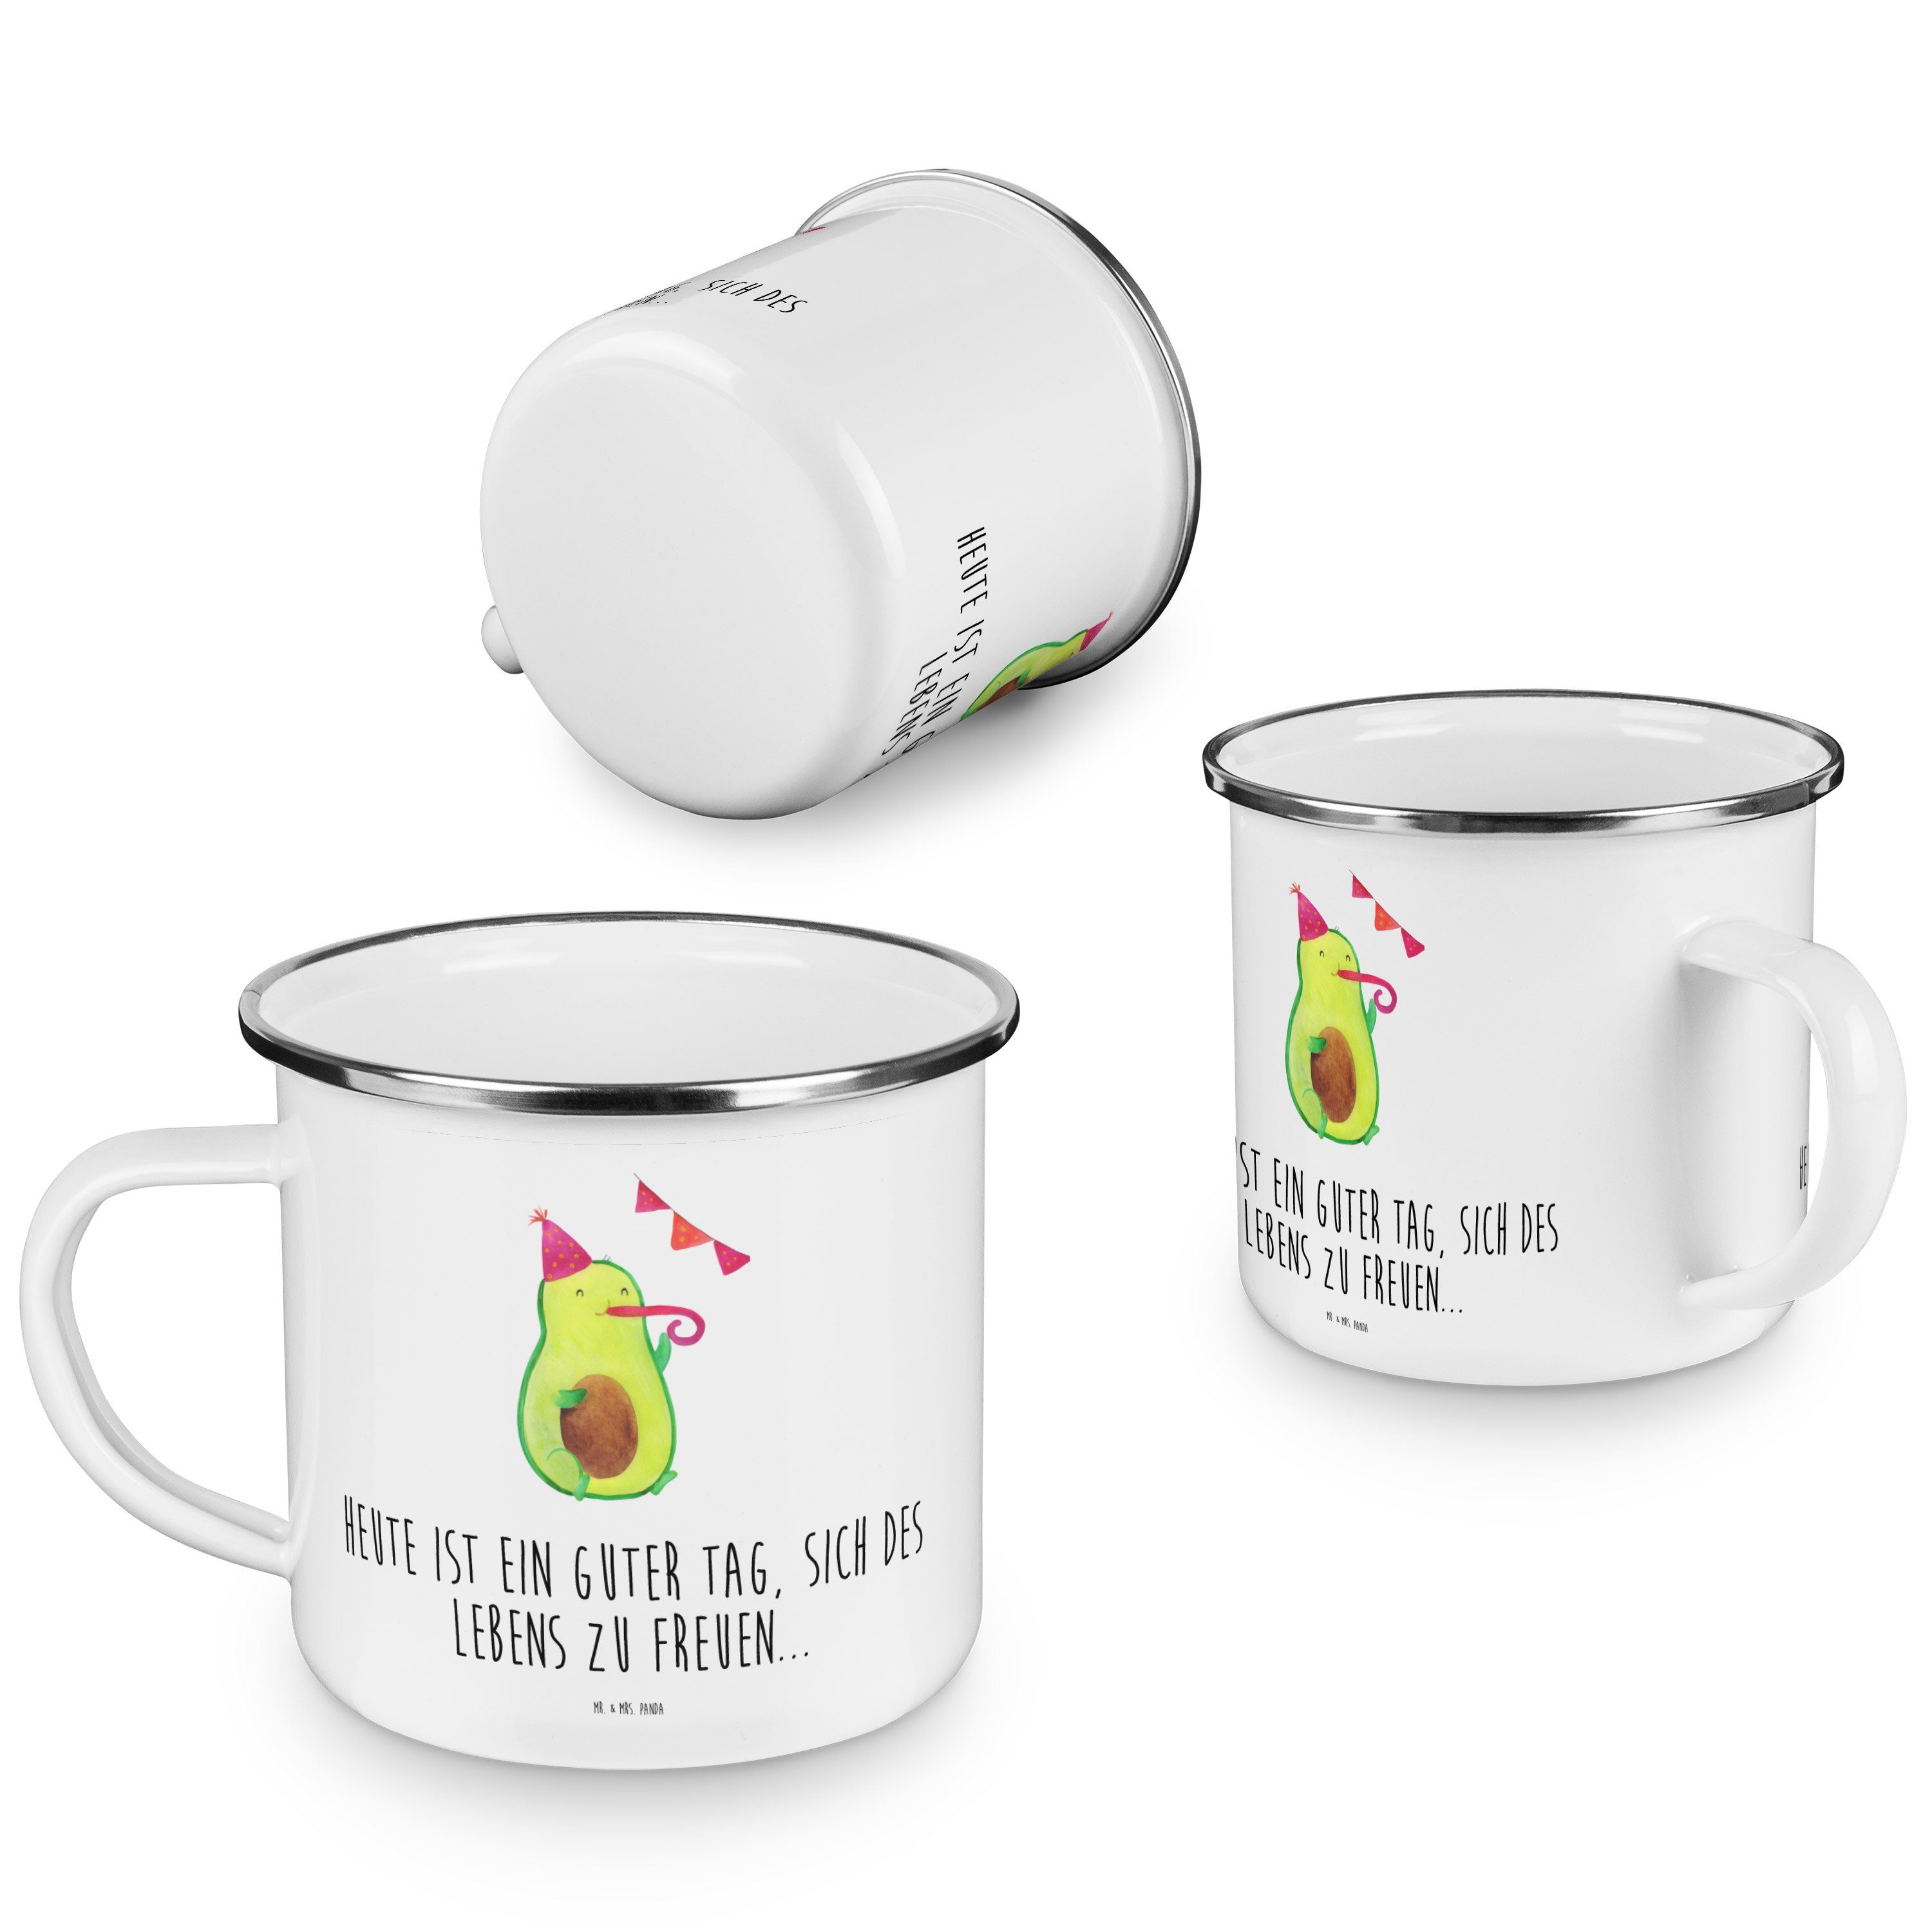 Emaille Mrs. Weiß Party Becher Avocado Campingbecher, Emaille Emaille Mr. & Panda Trink, - Geschenk, -